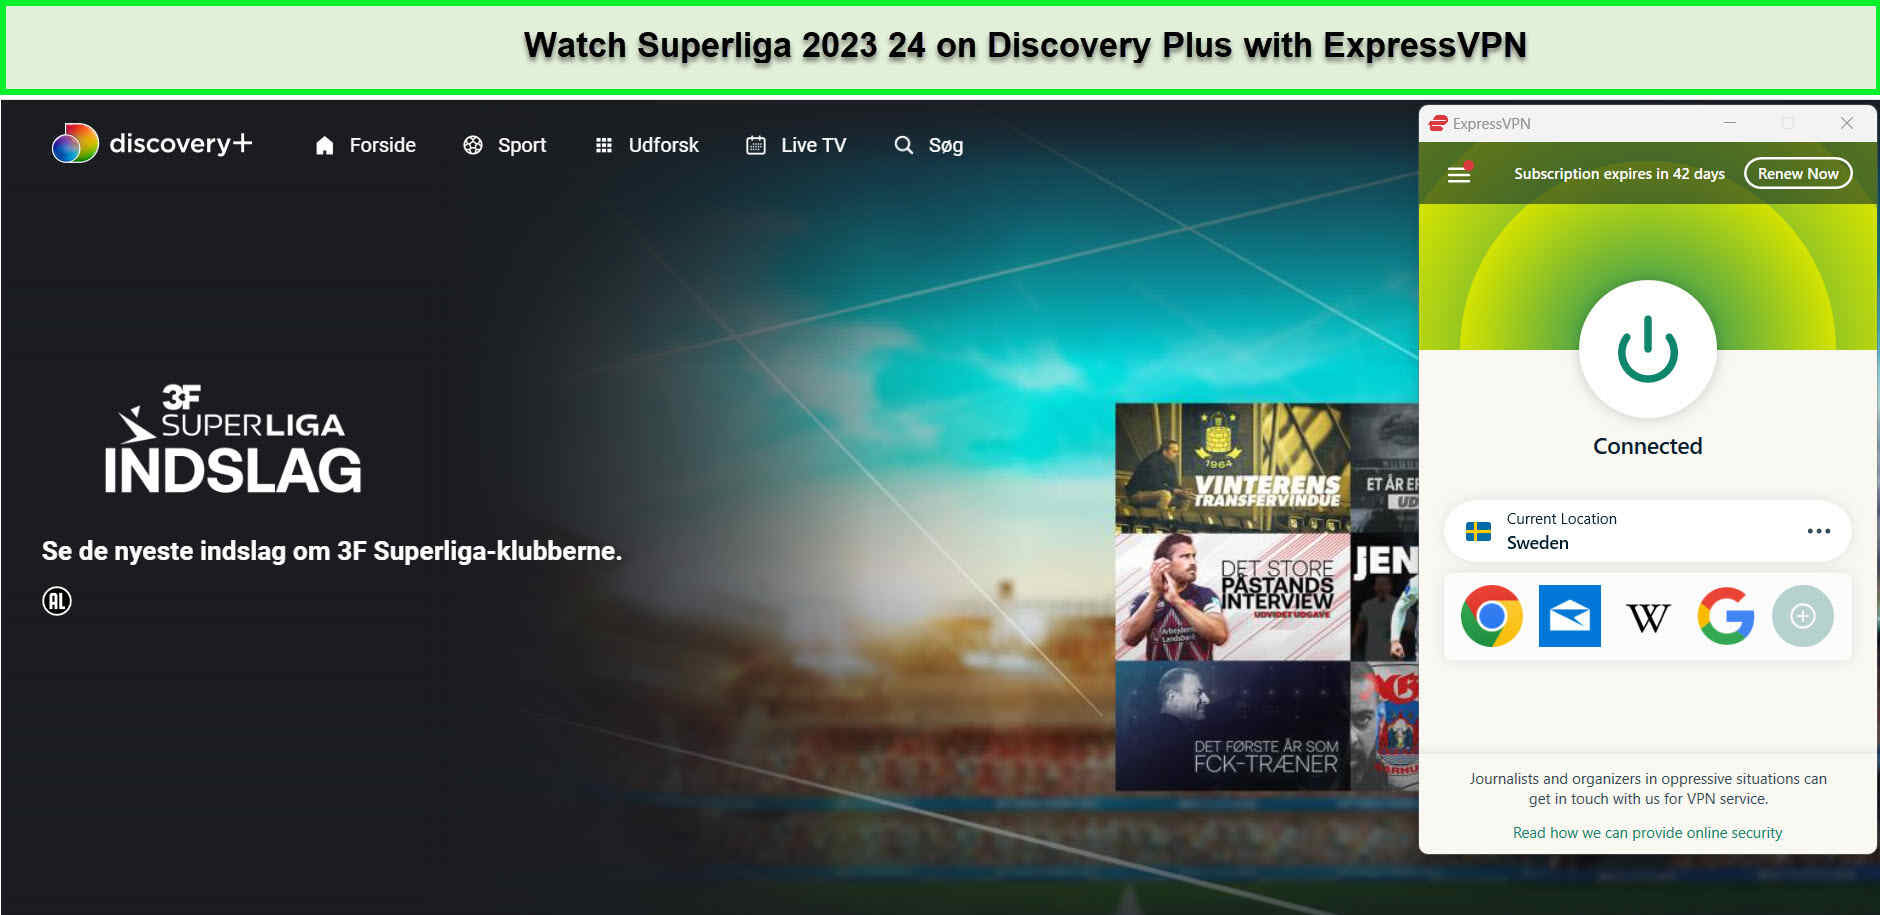 Watch-Superliga-2023-24-in-UK-on-Discovery-Plus-with-ExpressVPN!